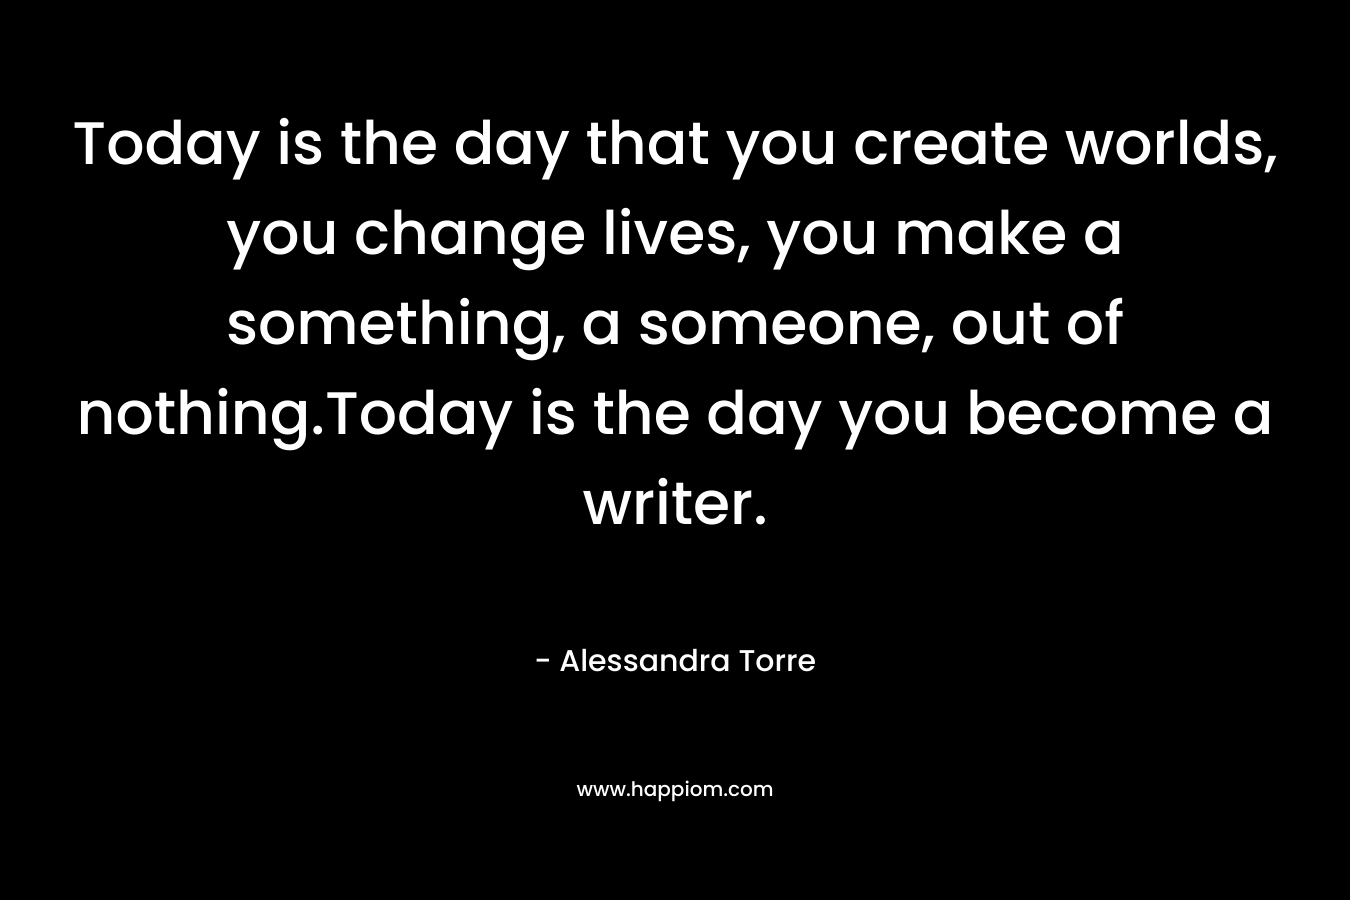 Today is the day that you create worlds, you change lives, you make a something, a someone, out of nothing.Today is the day you become a writer.